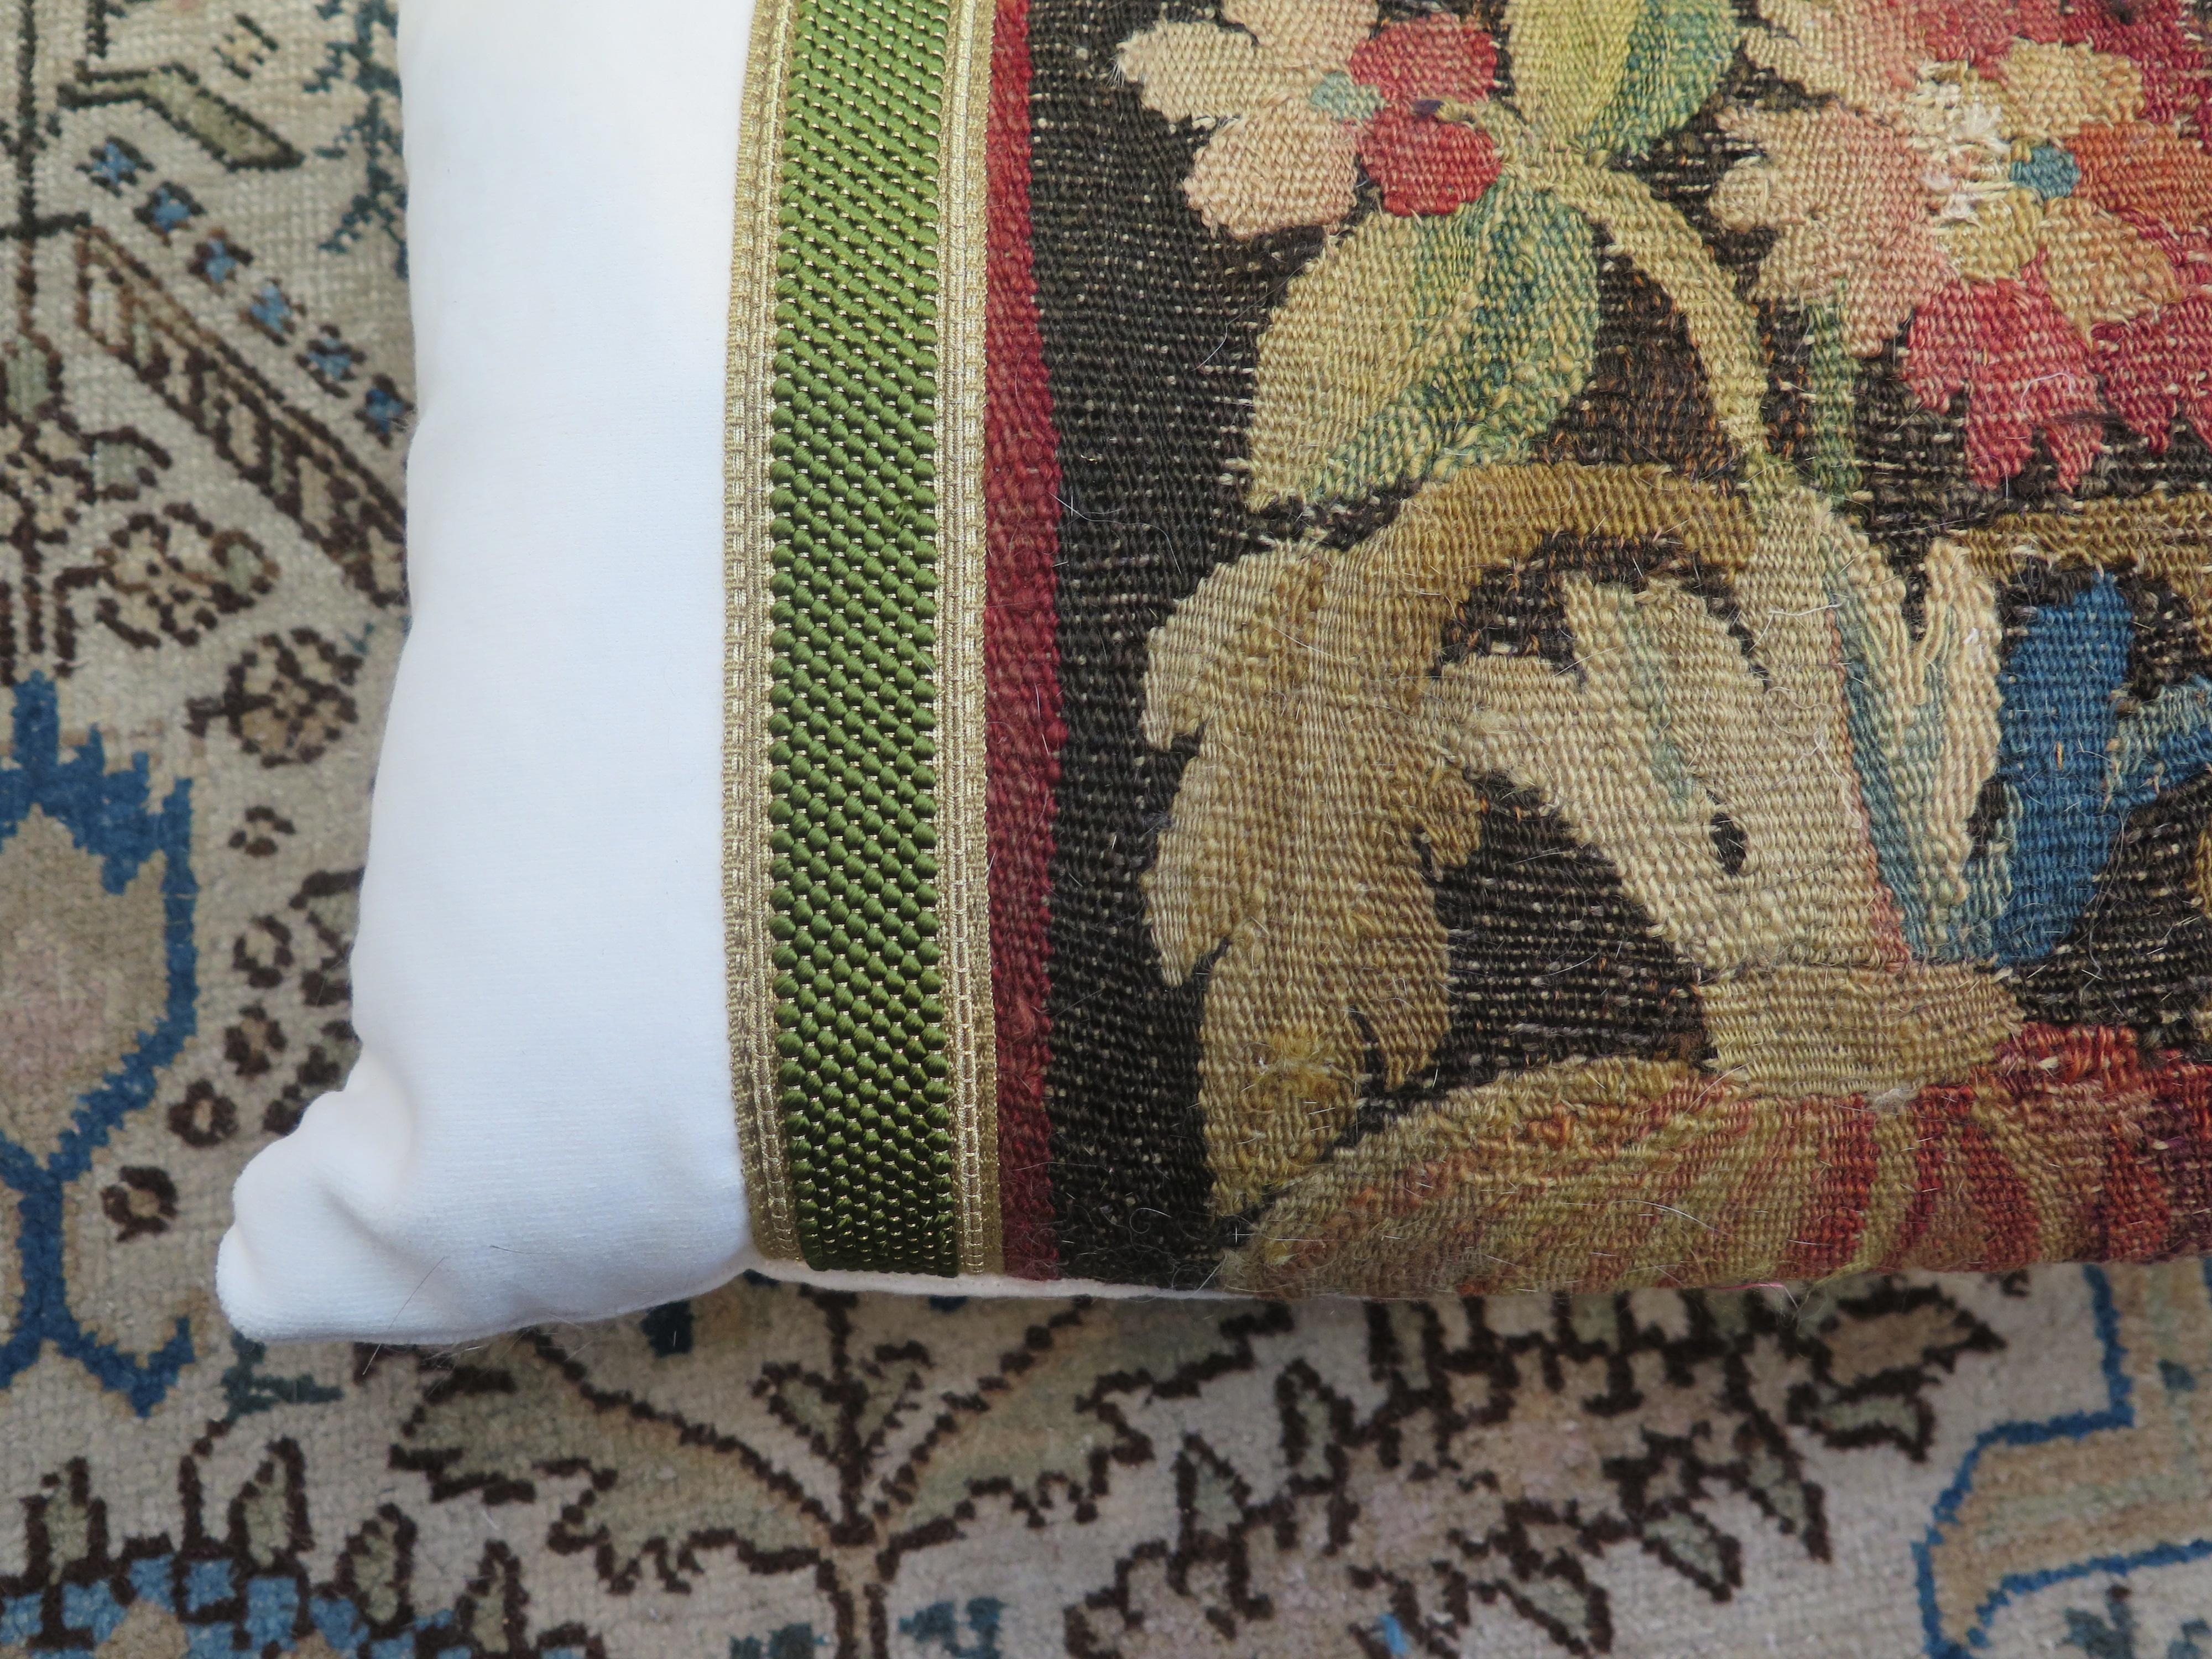 Custom 18th century floral tapestry pillow in Holly Hunt performance velvet and gold metallic trim. Down filled.